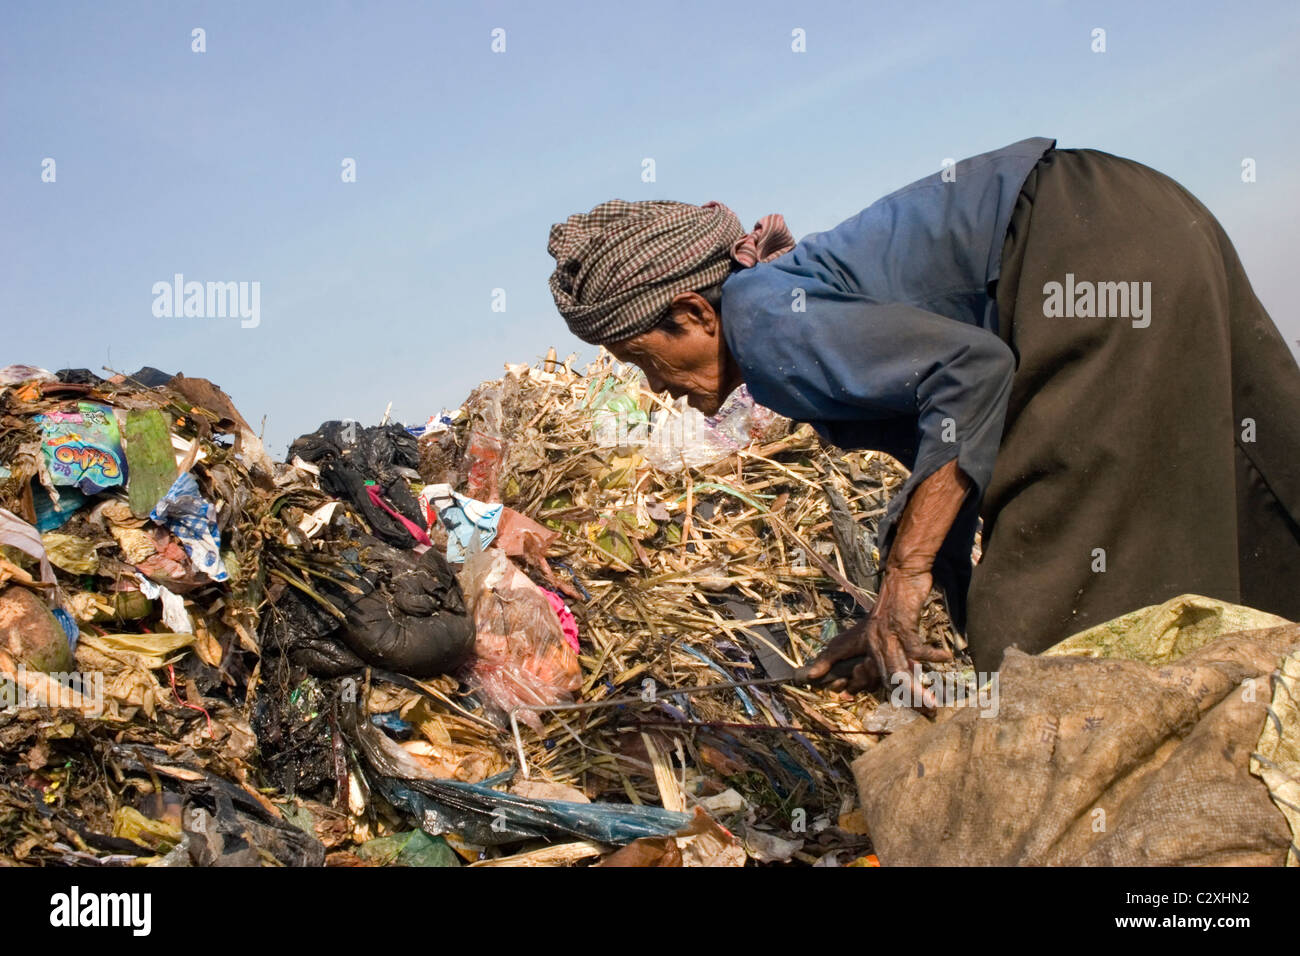 An elderly woman is searching for recyclable material at a polluted garbage dump in Cambodia. Stock Photo